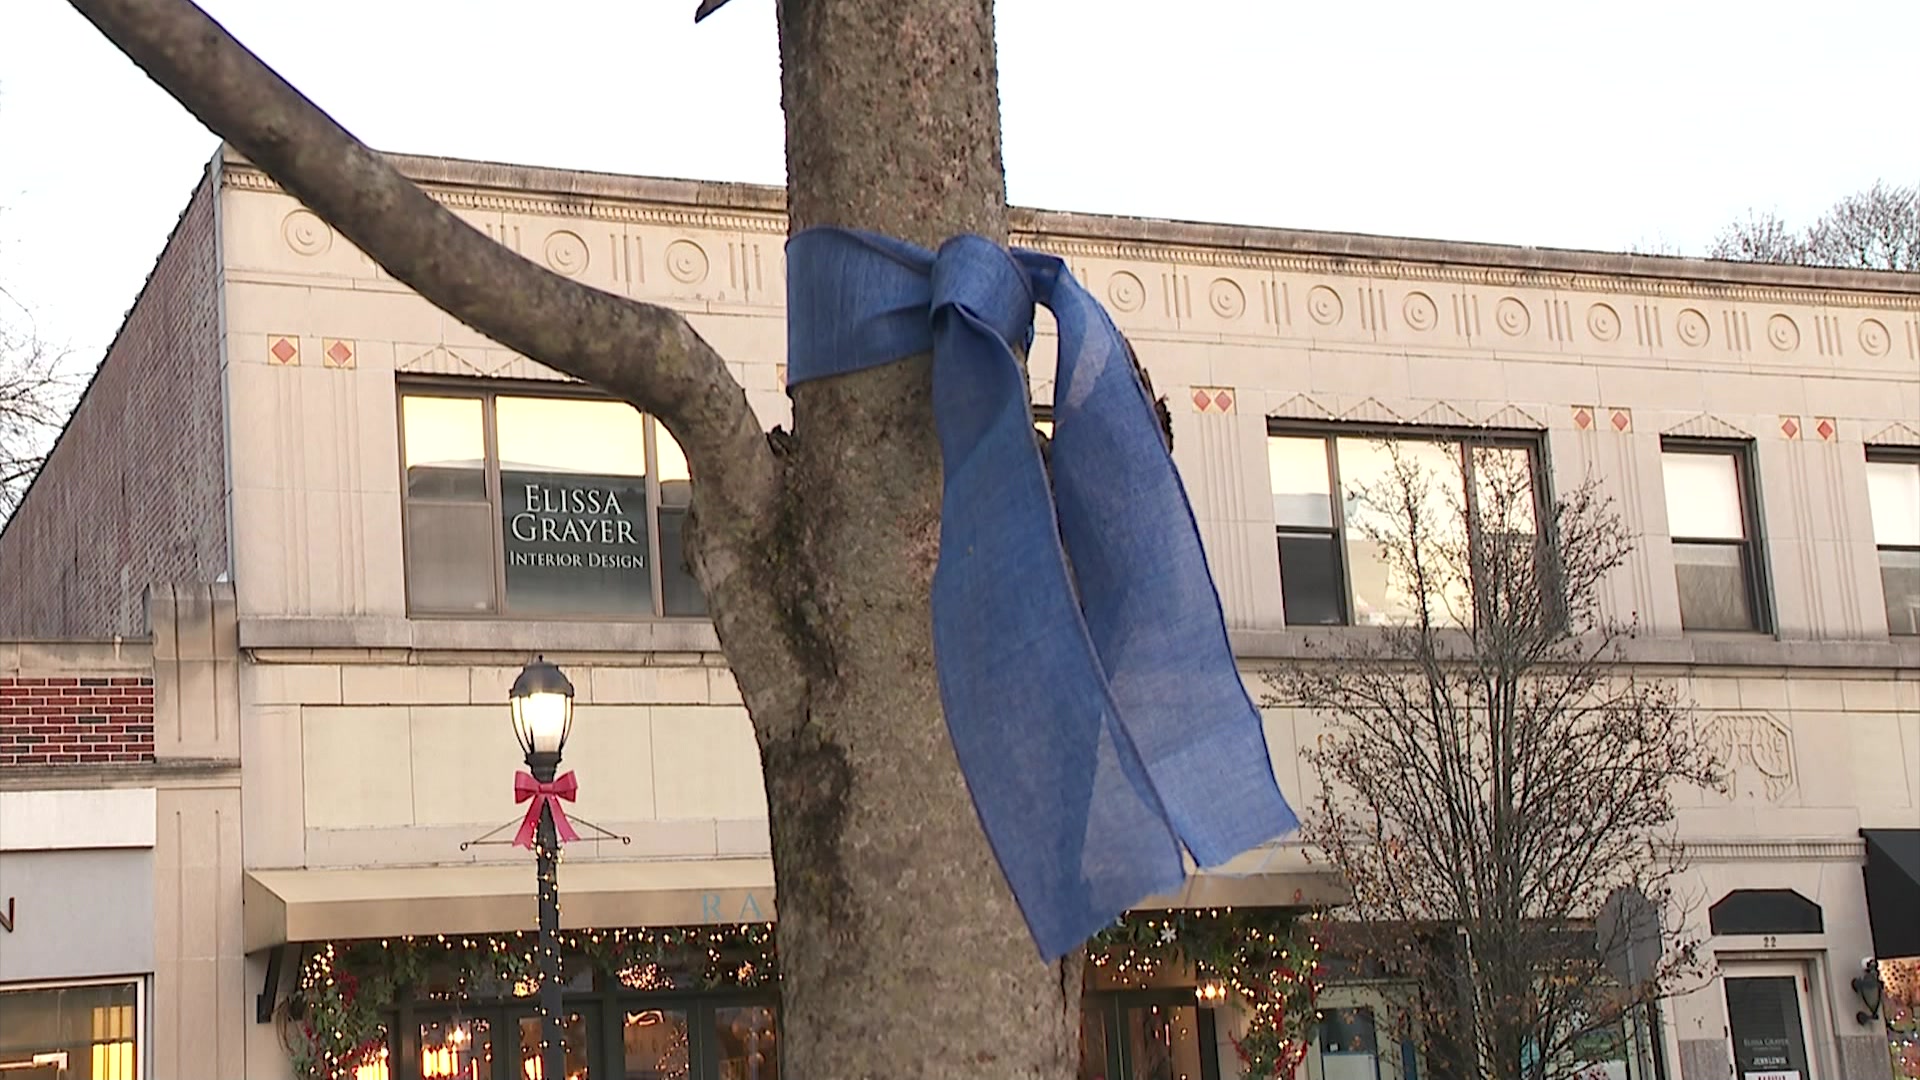 Blue ribbons showing support for Israeli hostages spark debate in Rye over  city permits, laws - ABC7 New York